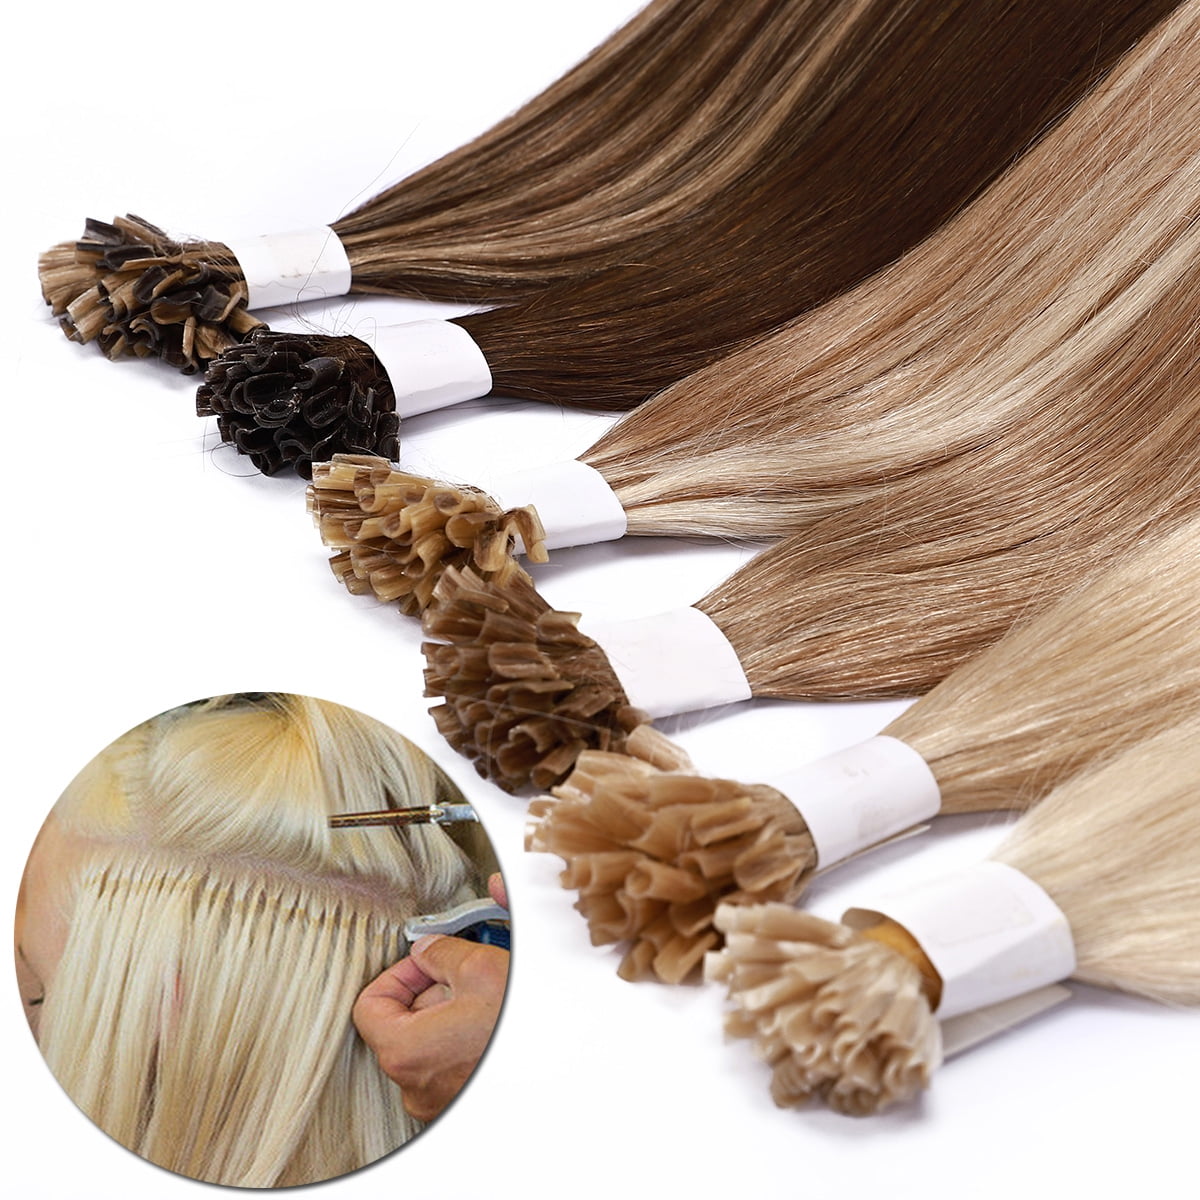 Details about   2pcs Wooden Handle Hair Extension Pulling Threader Micro Rings Bead Loop Tools